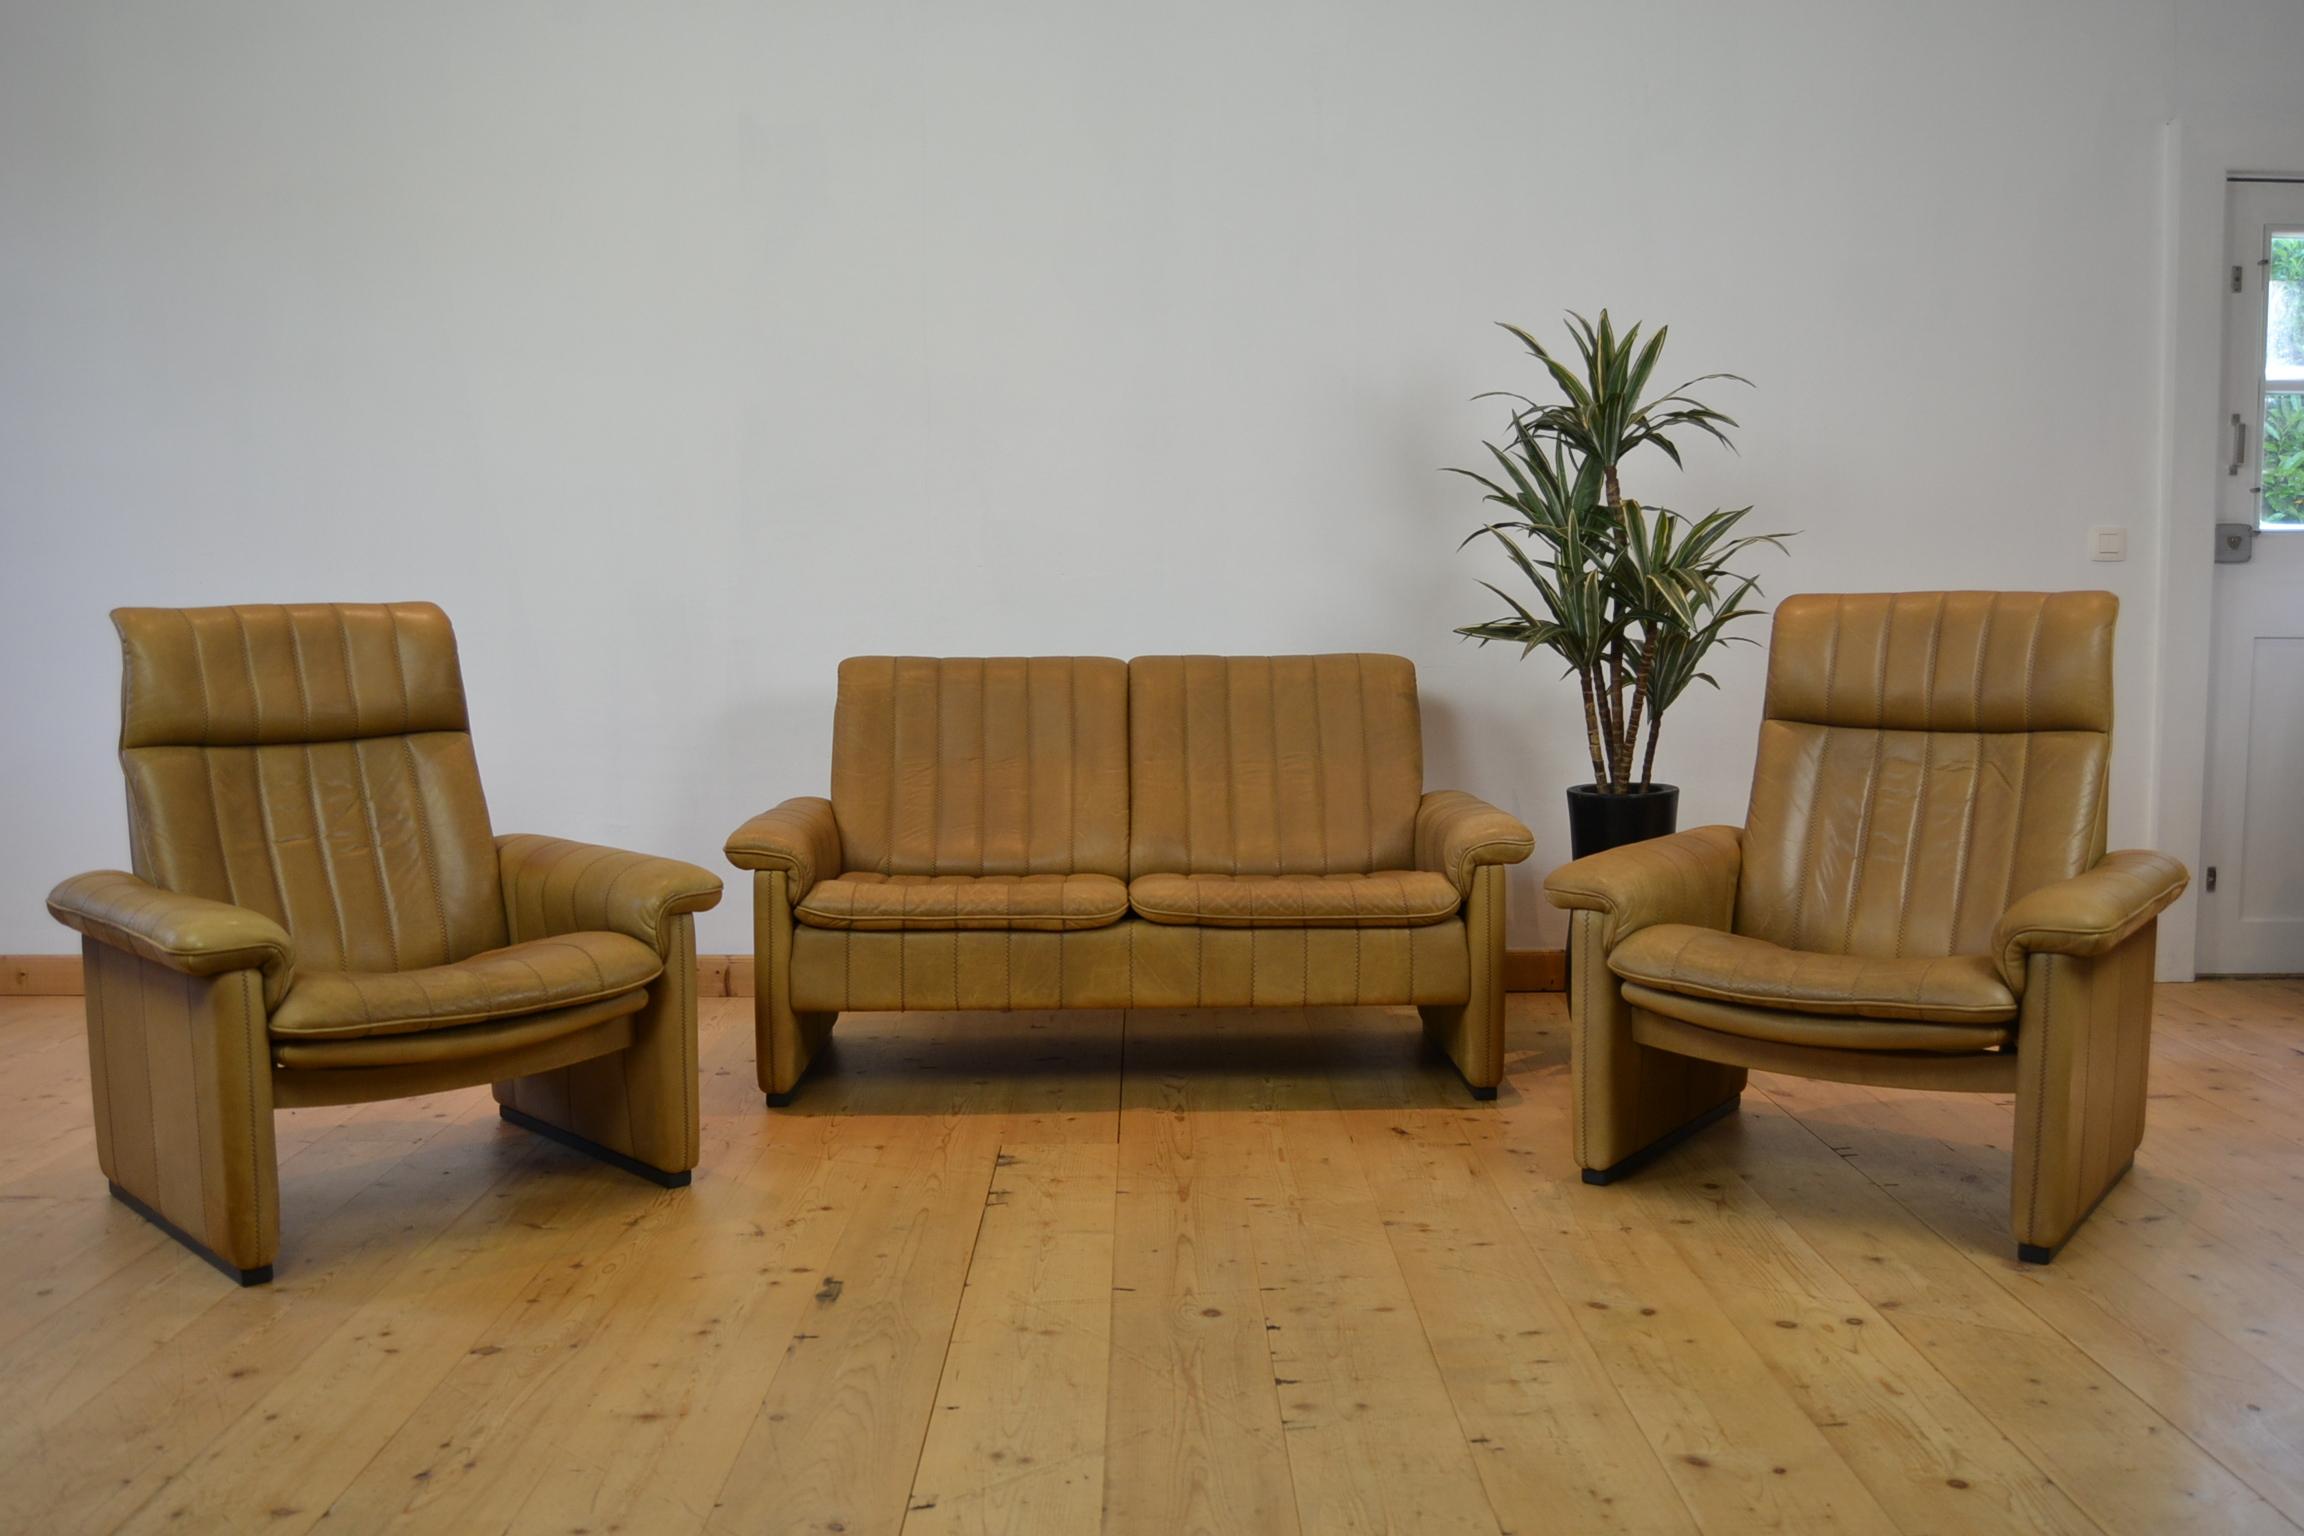 Vintage De Sede Living Room Set, 2 Lounge Chairs and Sofa, Brown Leather 14